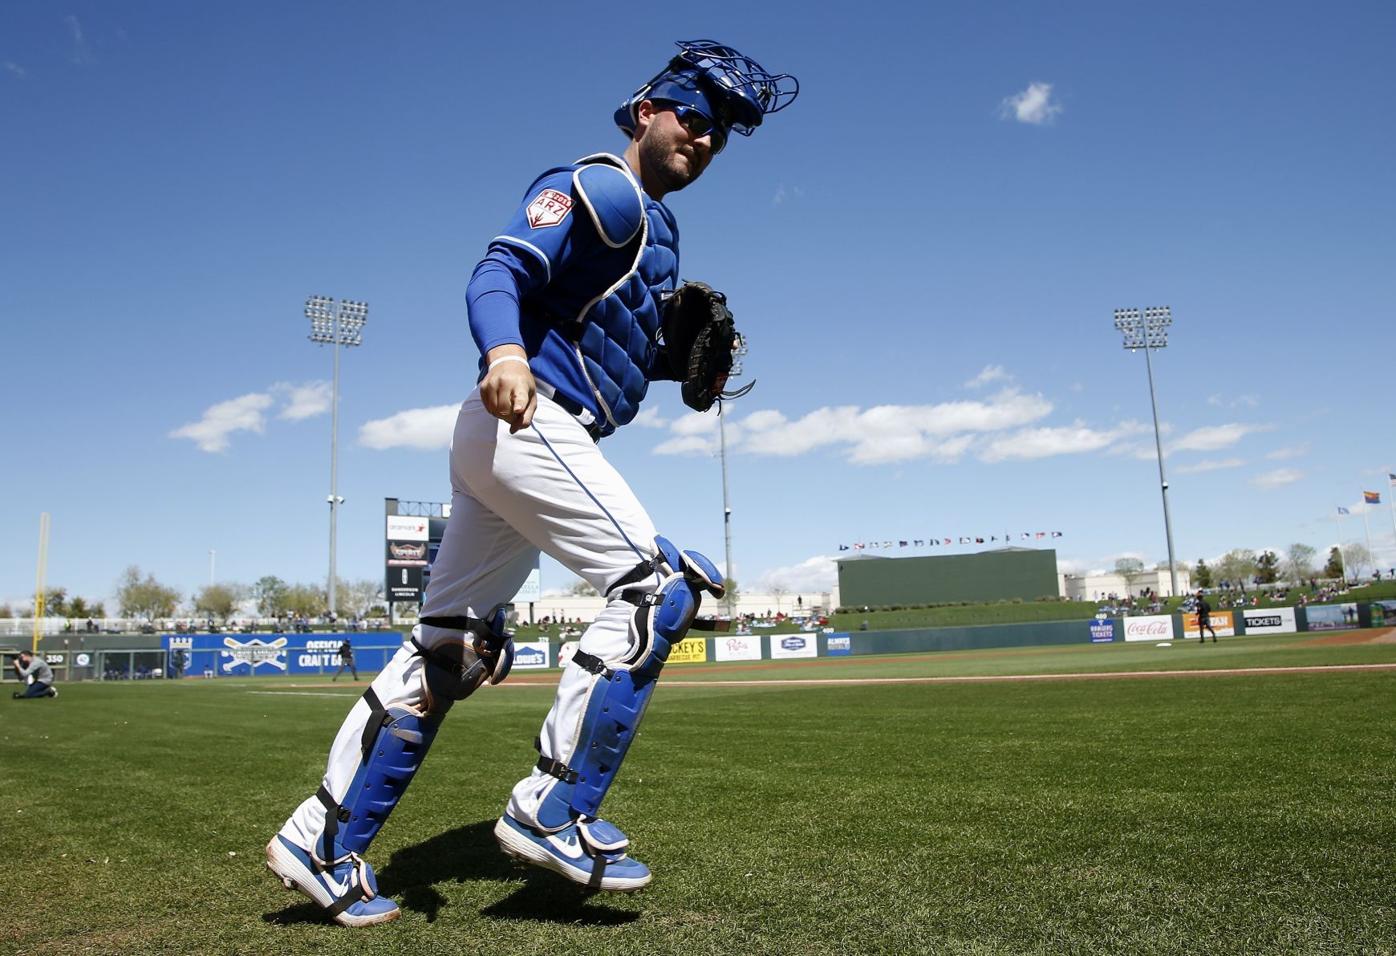 Cam Gallagher reports to Royals' spring training Wednesday, Sports